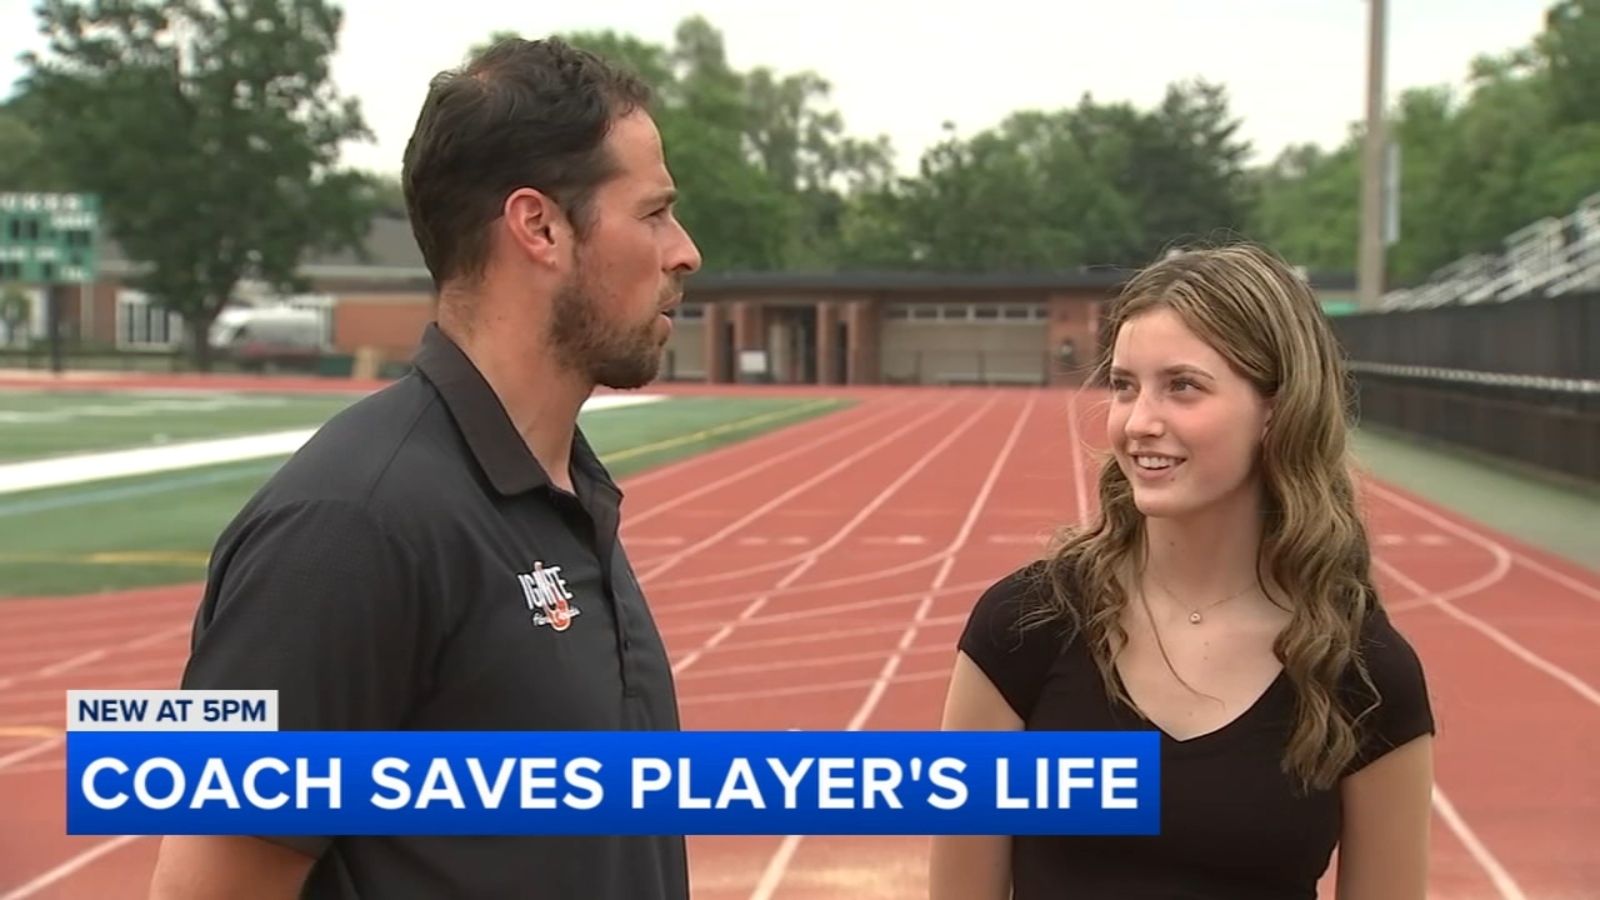 York High School track coach Nicholas Karavolos used CPR to save student athlete Chloe Peot from cardiac arrest during meet [Video]